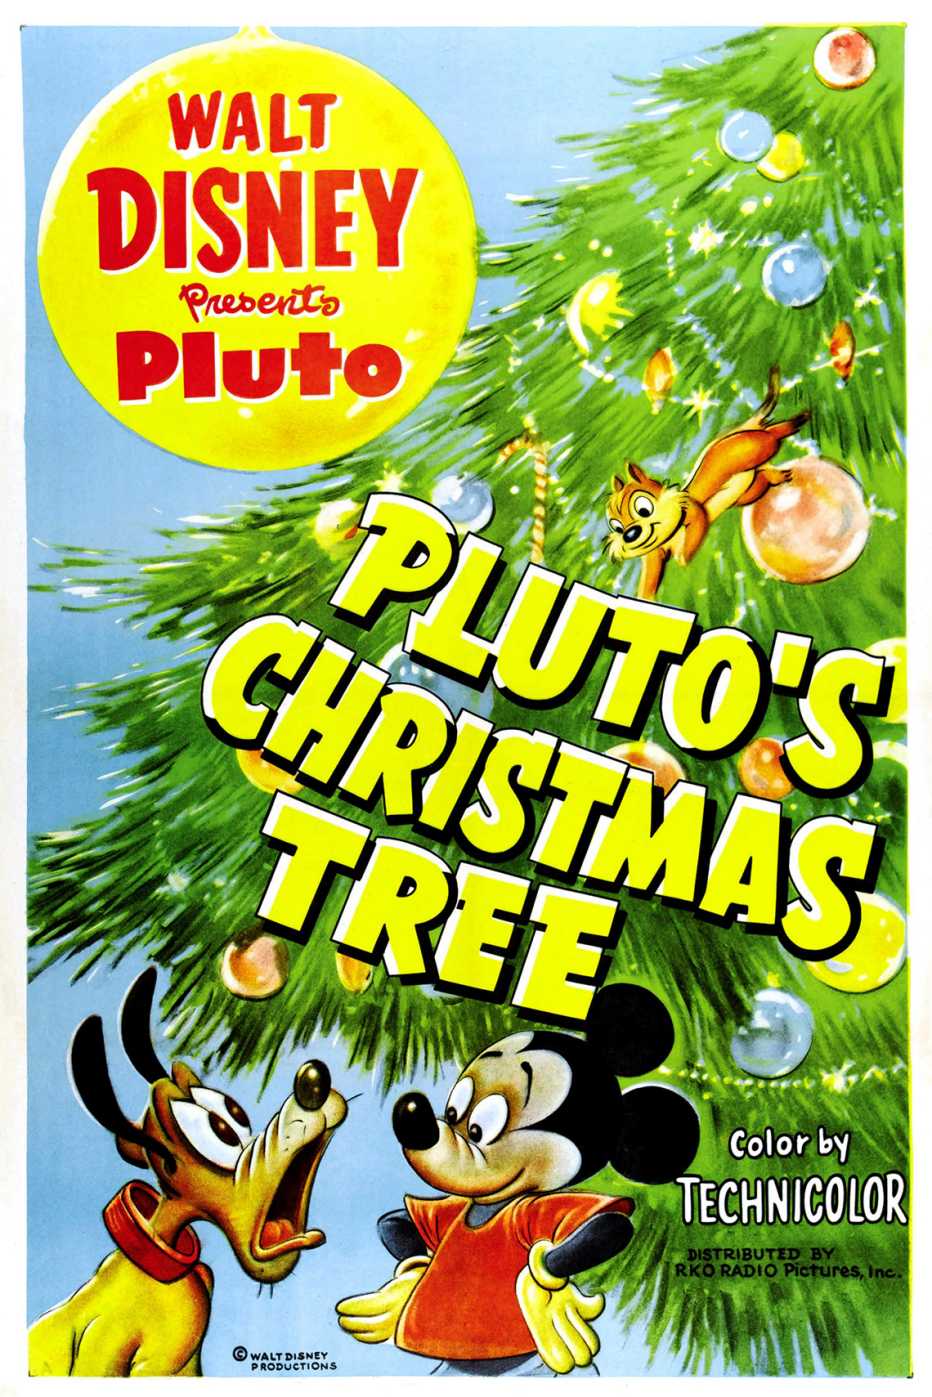 A poster for Pluto's Christmas Tree